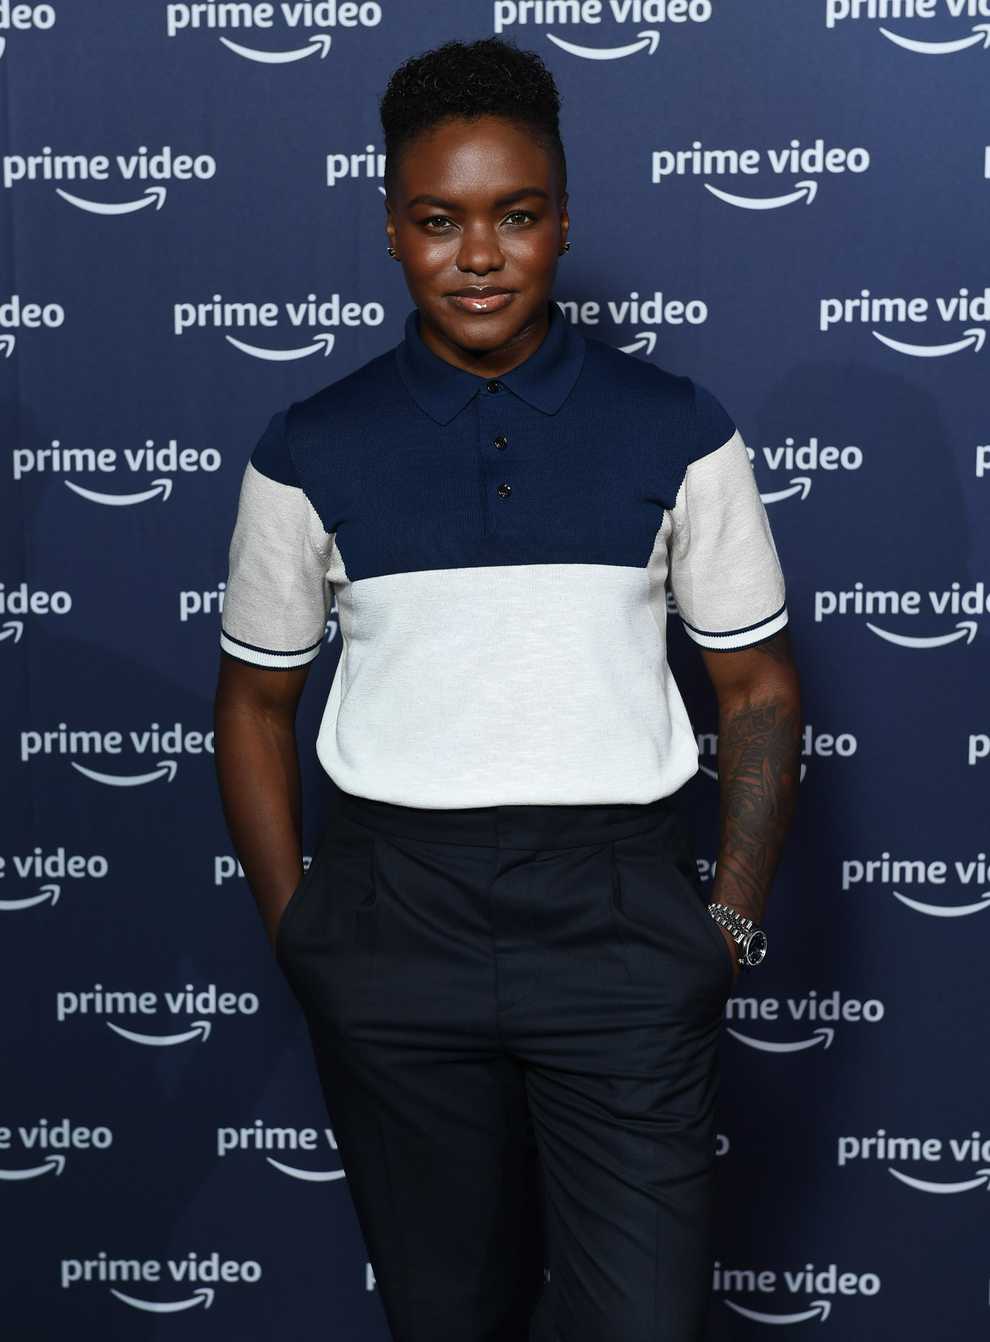 Nicola Adams wants to launch an acting career (Prime Video handout/PA)